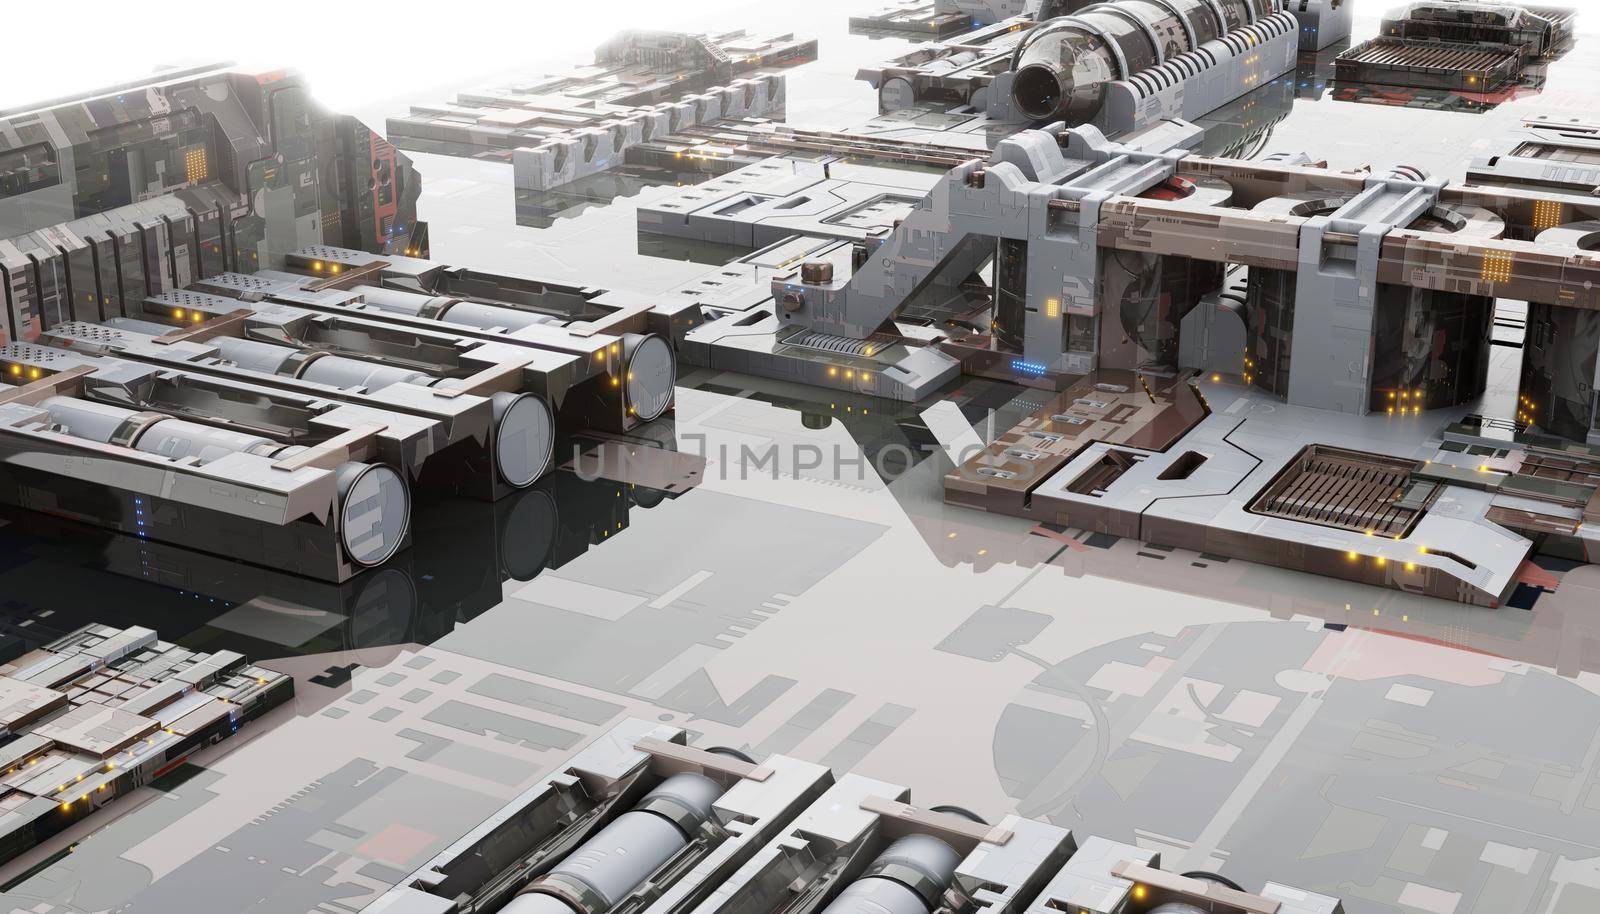 Space military base with innovative construction technology background. Sci-fi and industrial concept. 3D illustration rendering by MiniStocker